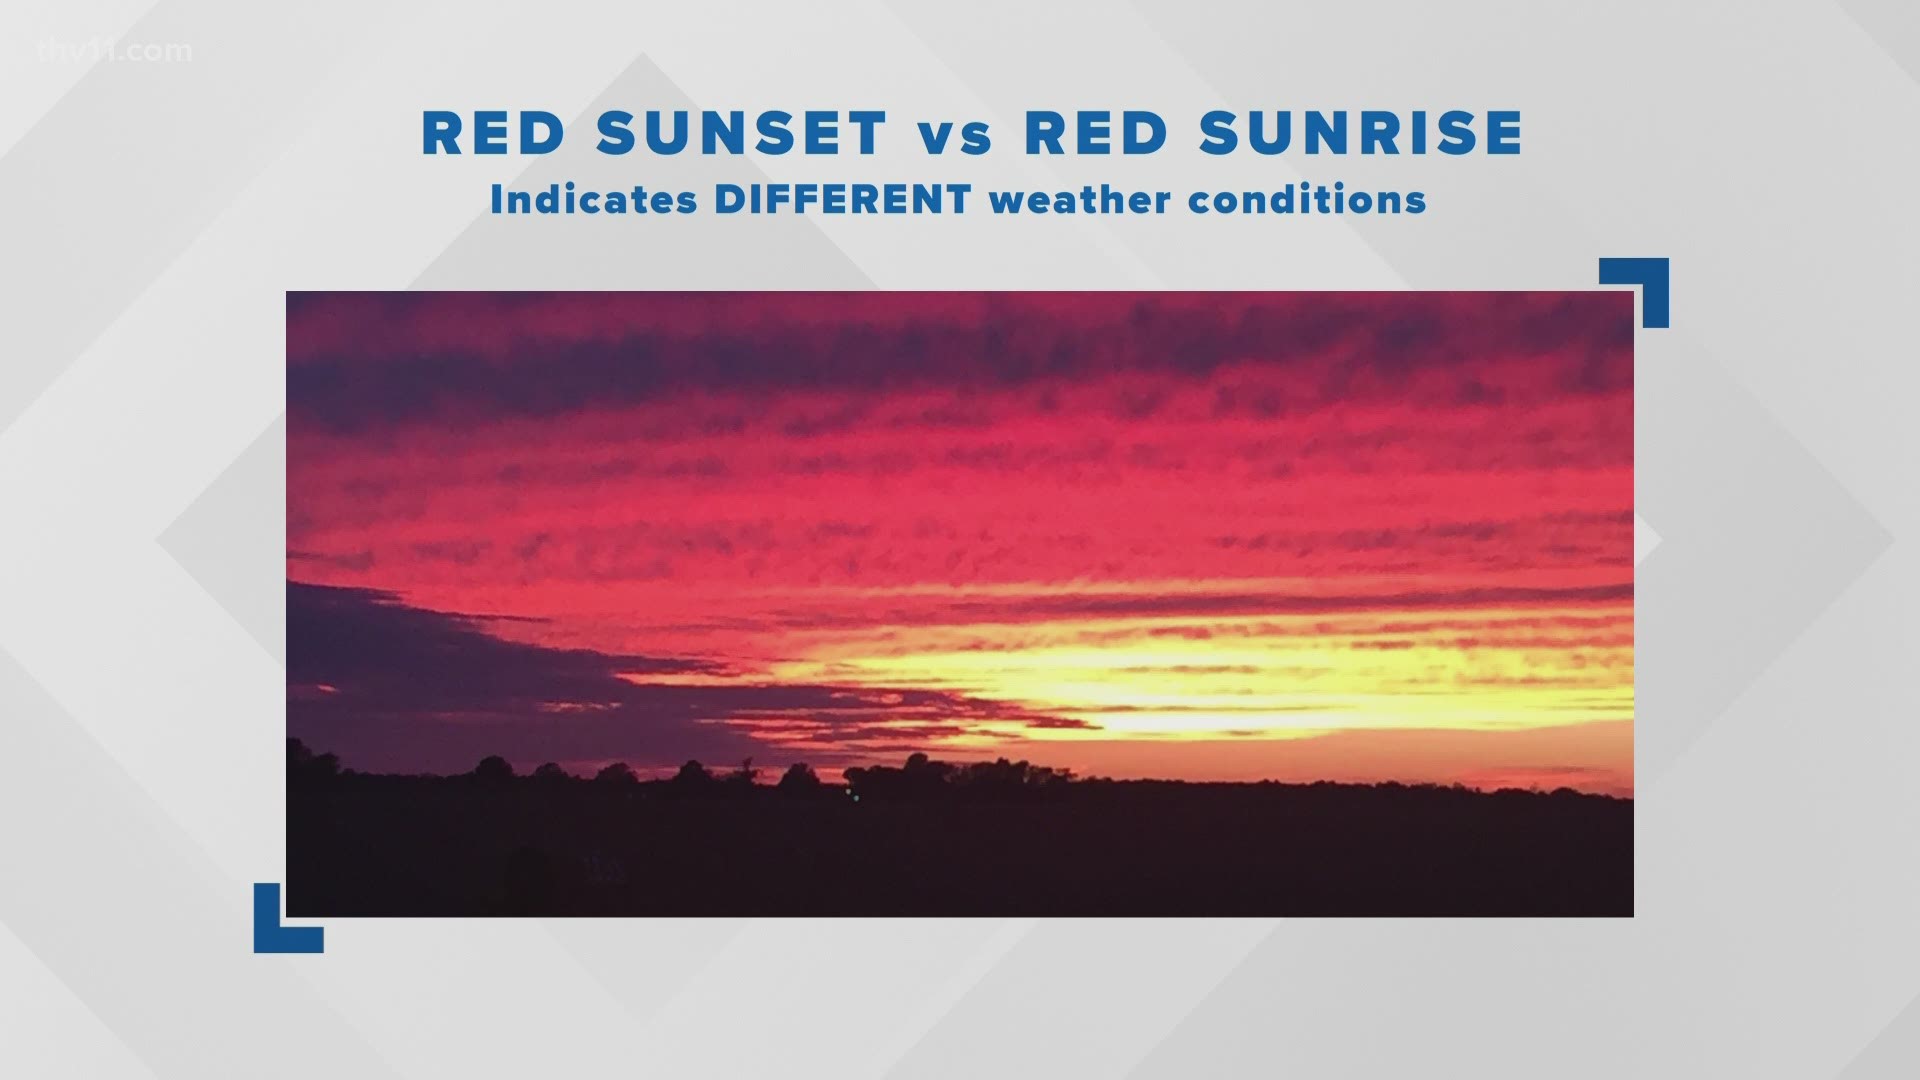 A red sunset versus sunrise could indicate something very different when it comes to weather conditions in the future.